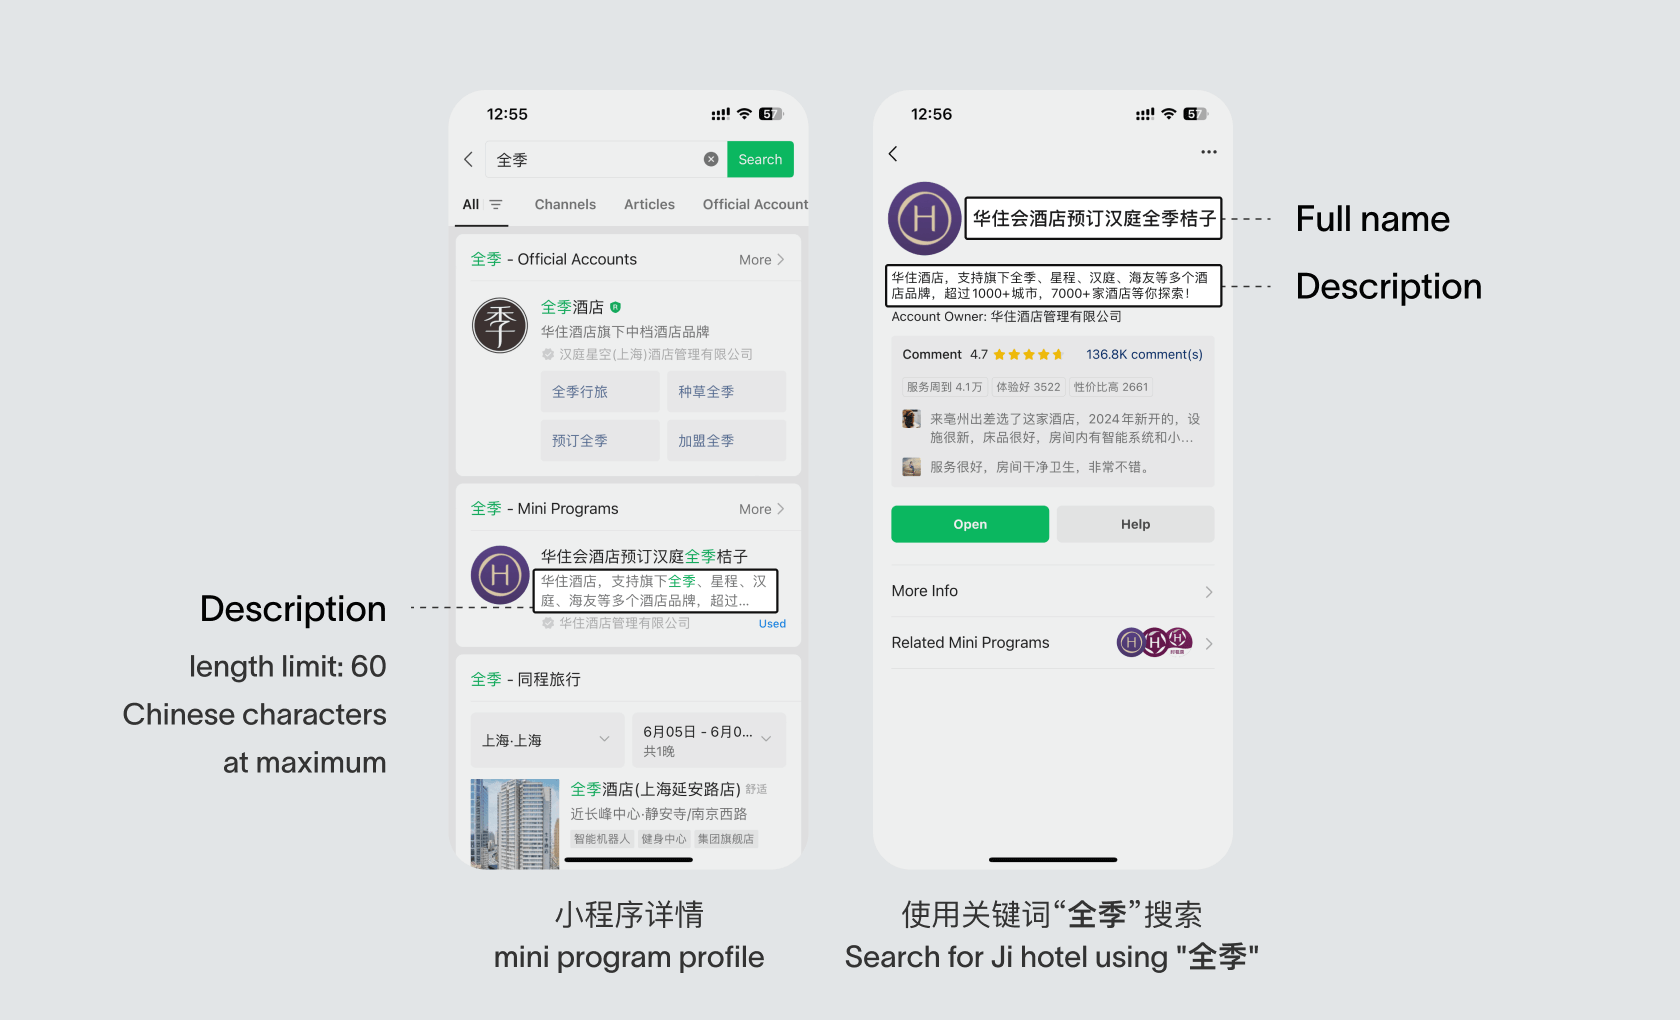 wechat mini program full name and description character limit display